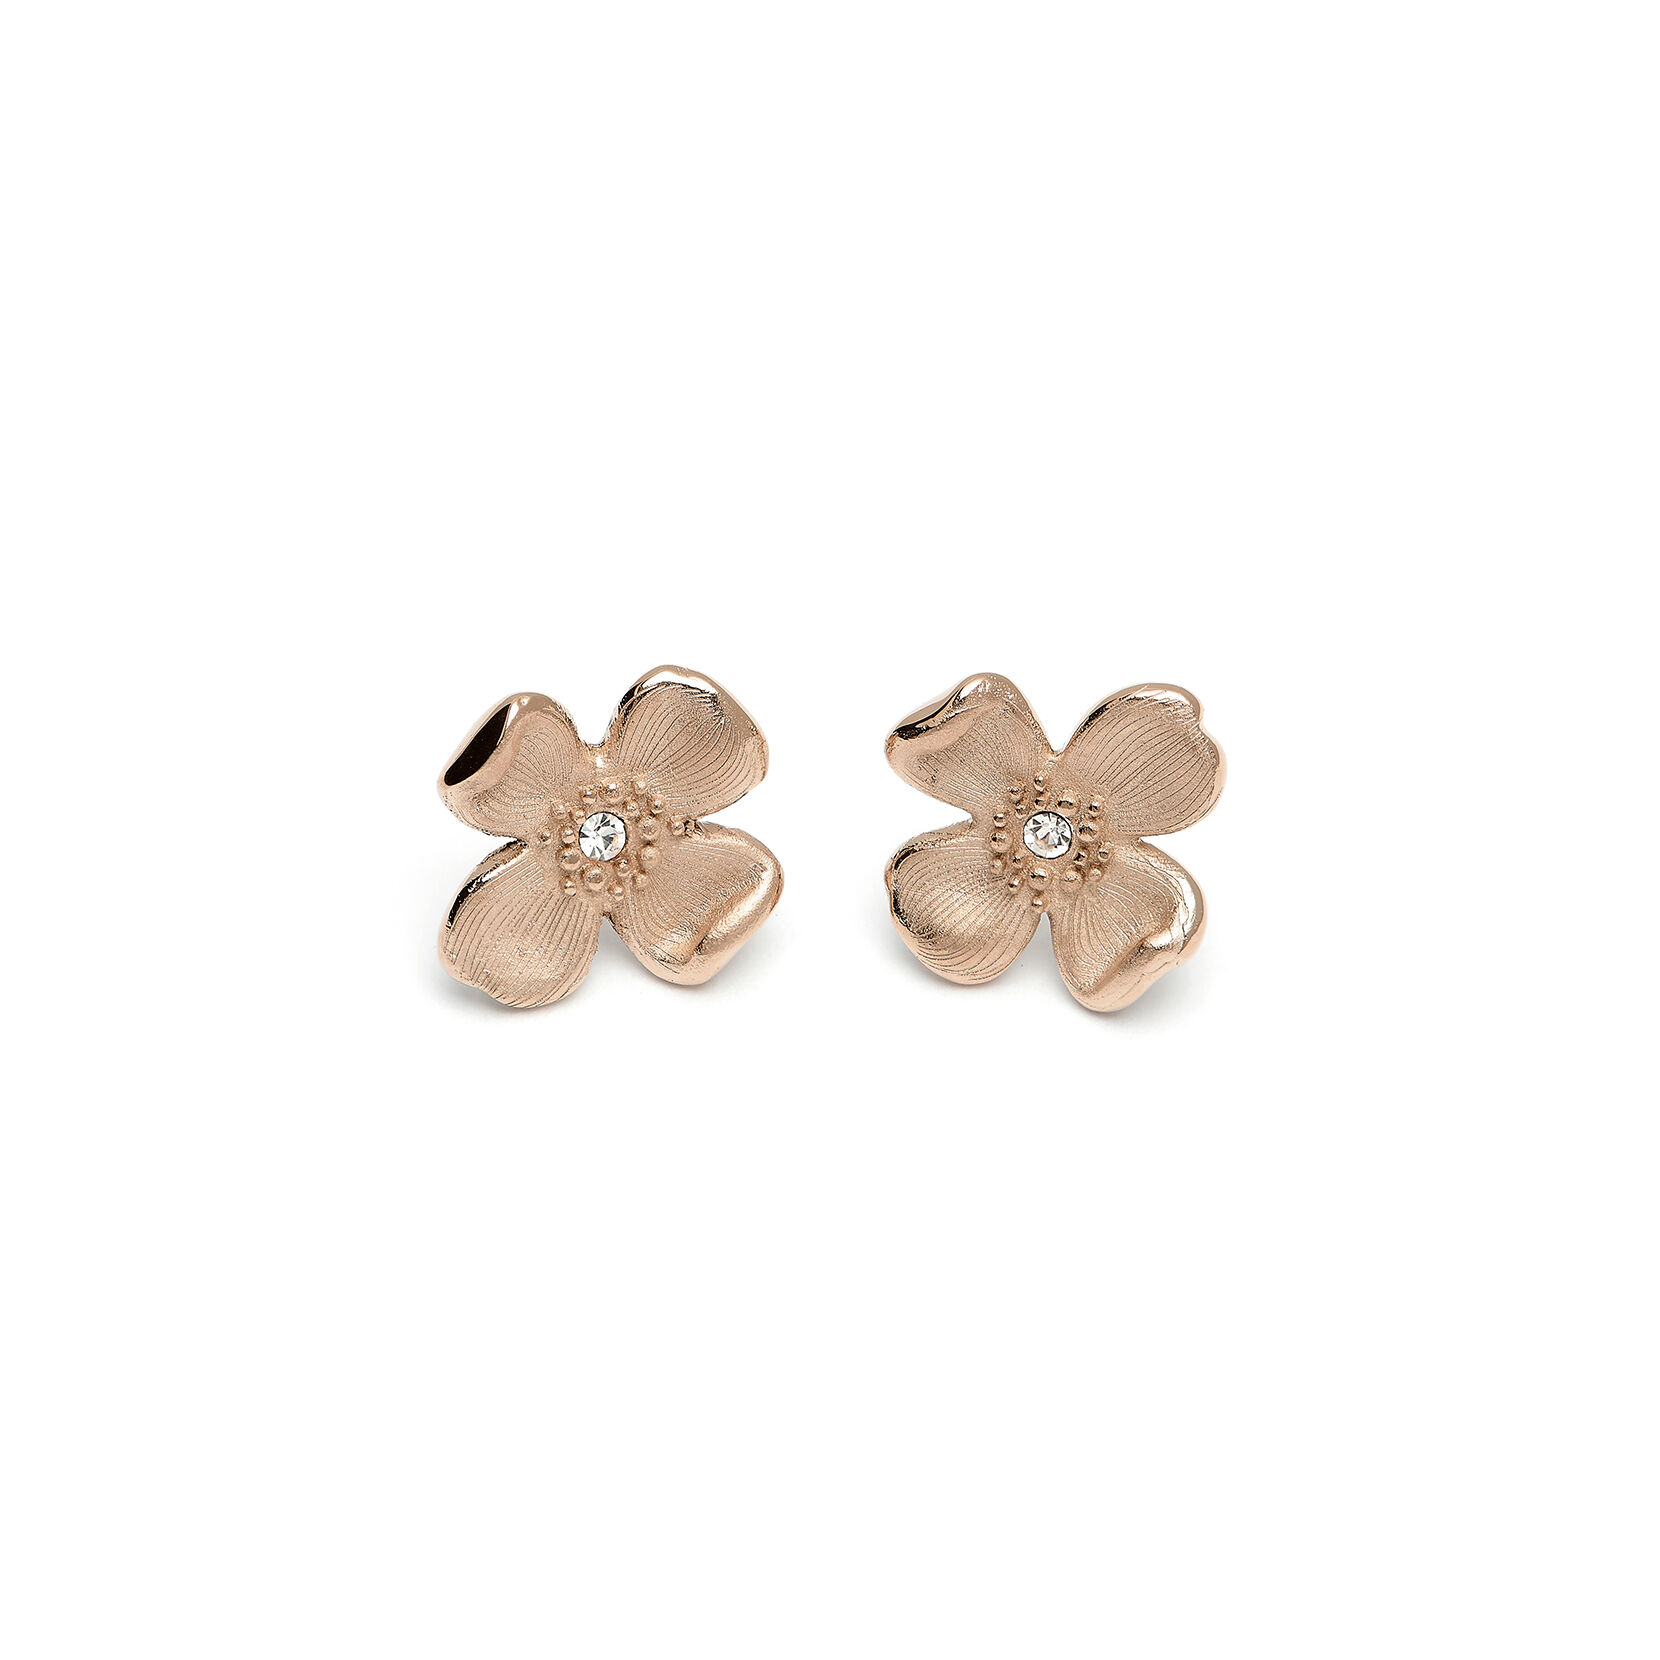 Buy Sterling Silver Studs Online at Best Prices